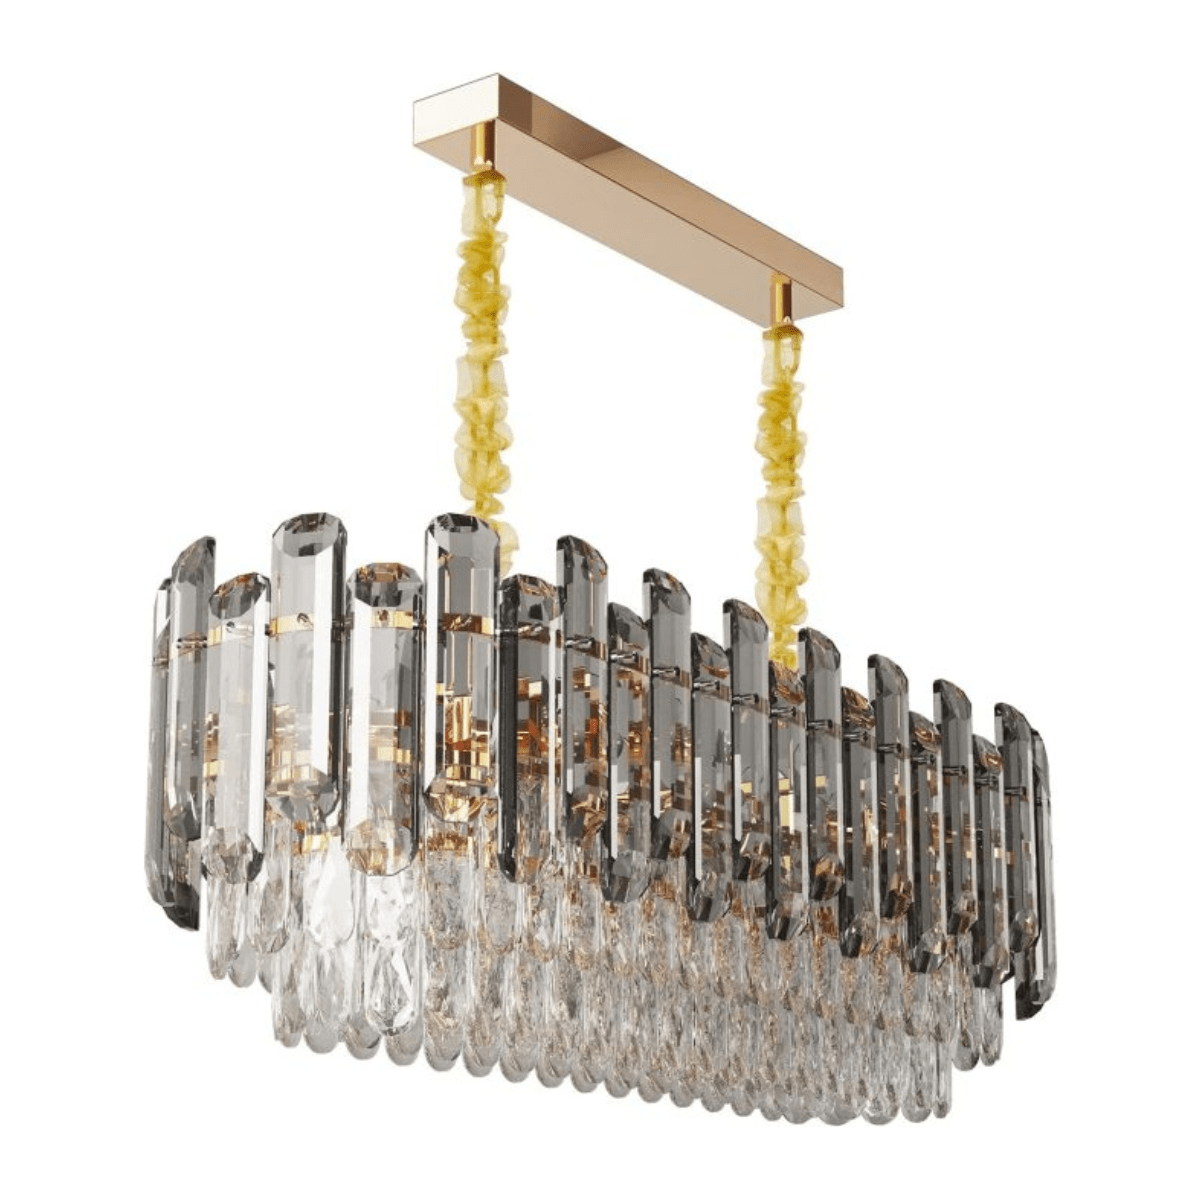 Buy Modern Oval Three-Tier Crystal Cut Edge Golden Ceiling Pendant Chandelier 80cm - BH3013-OVAL | Shop at Supply Master Accra, Ghana Lamps & Lightings Buy Tools hardware Building materials